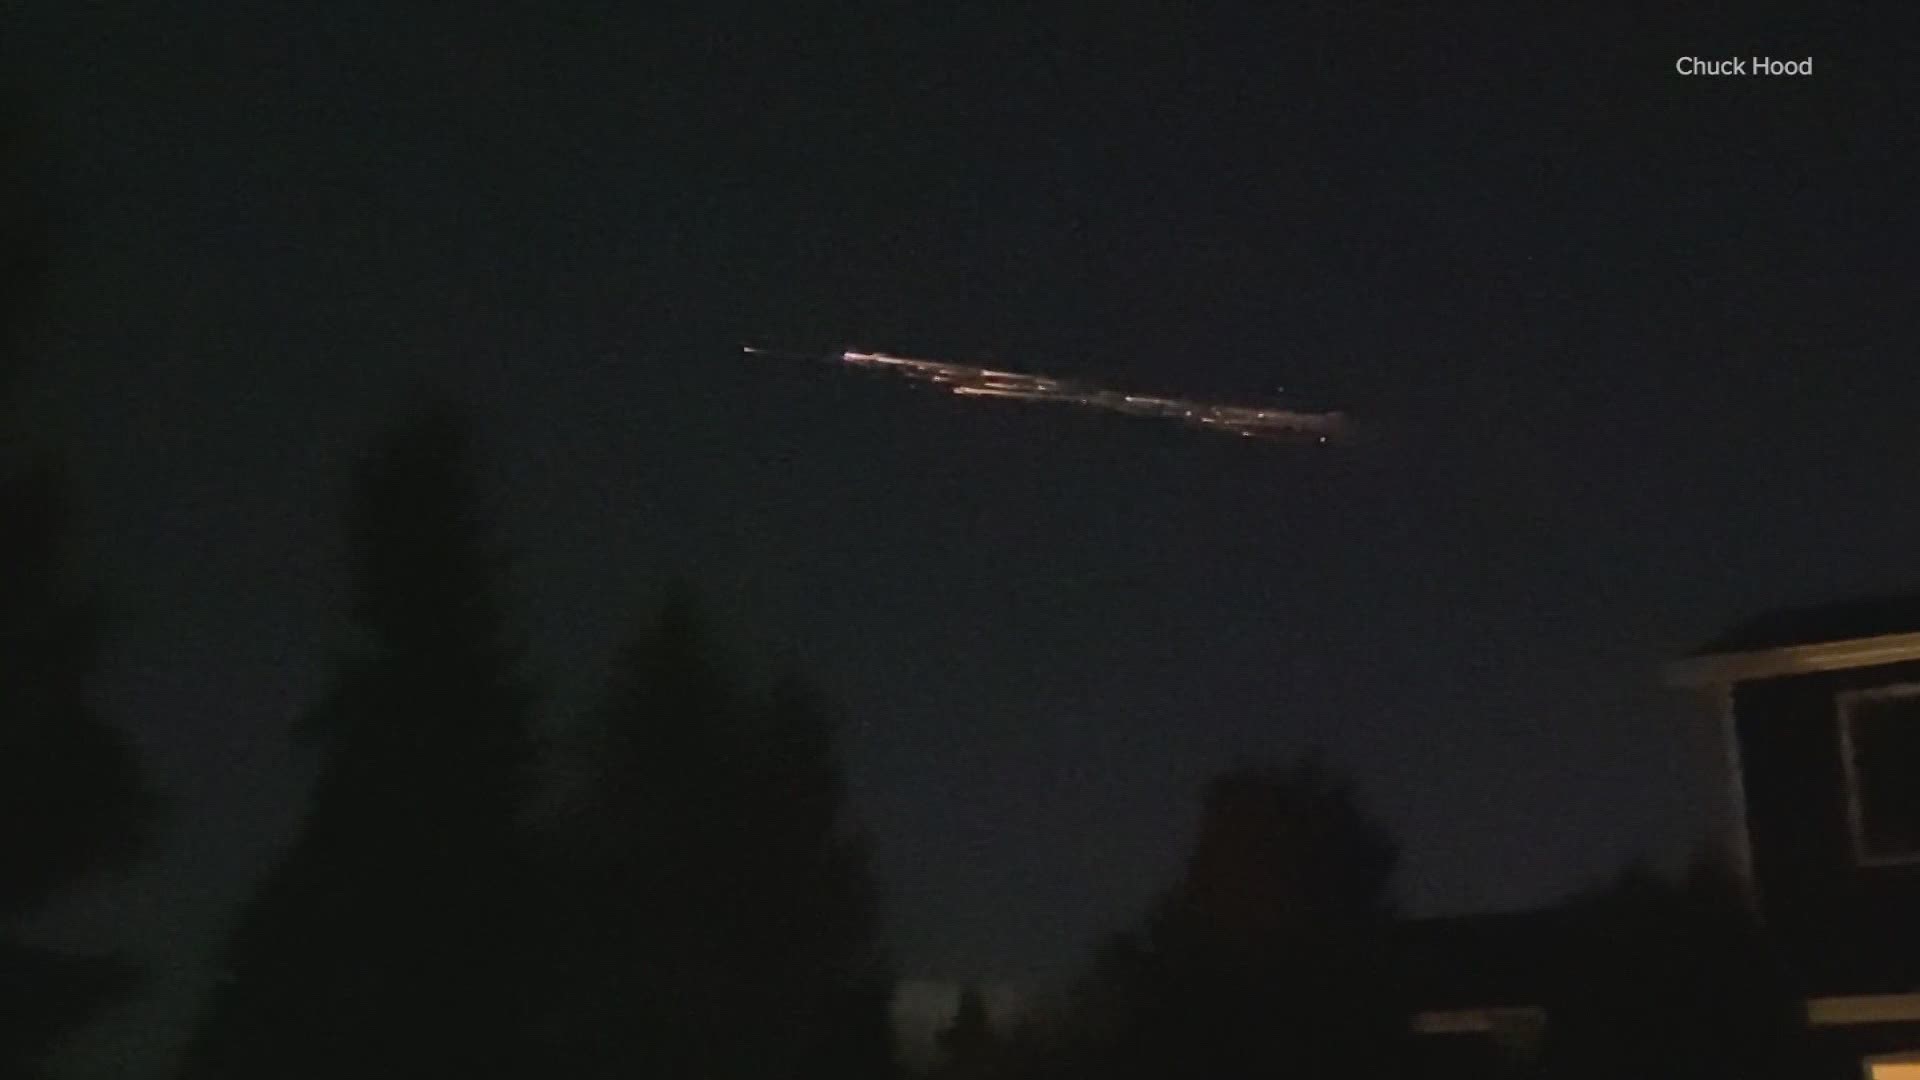 Debris from a SpaceX Falcon 9 rocket streaked over the Pacific Northwest night sky on March 25.